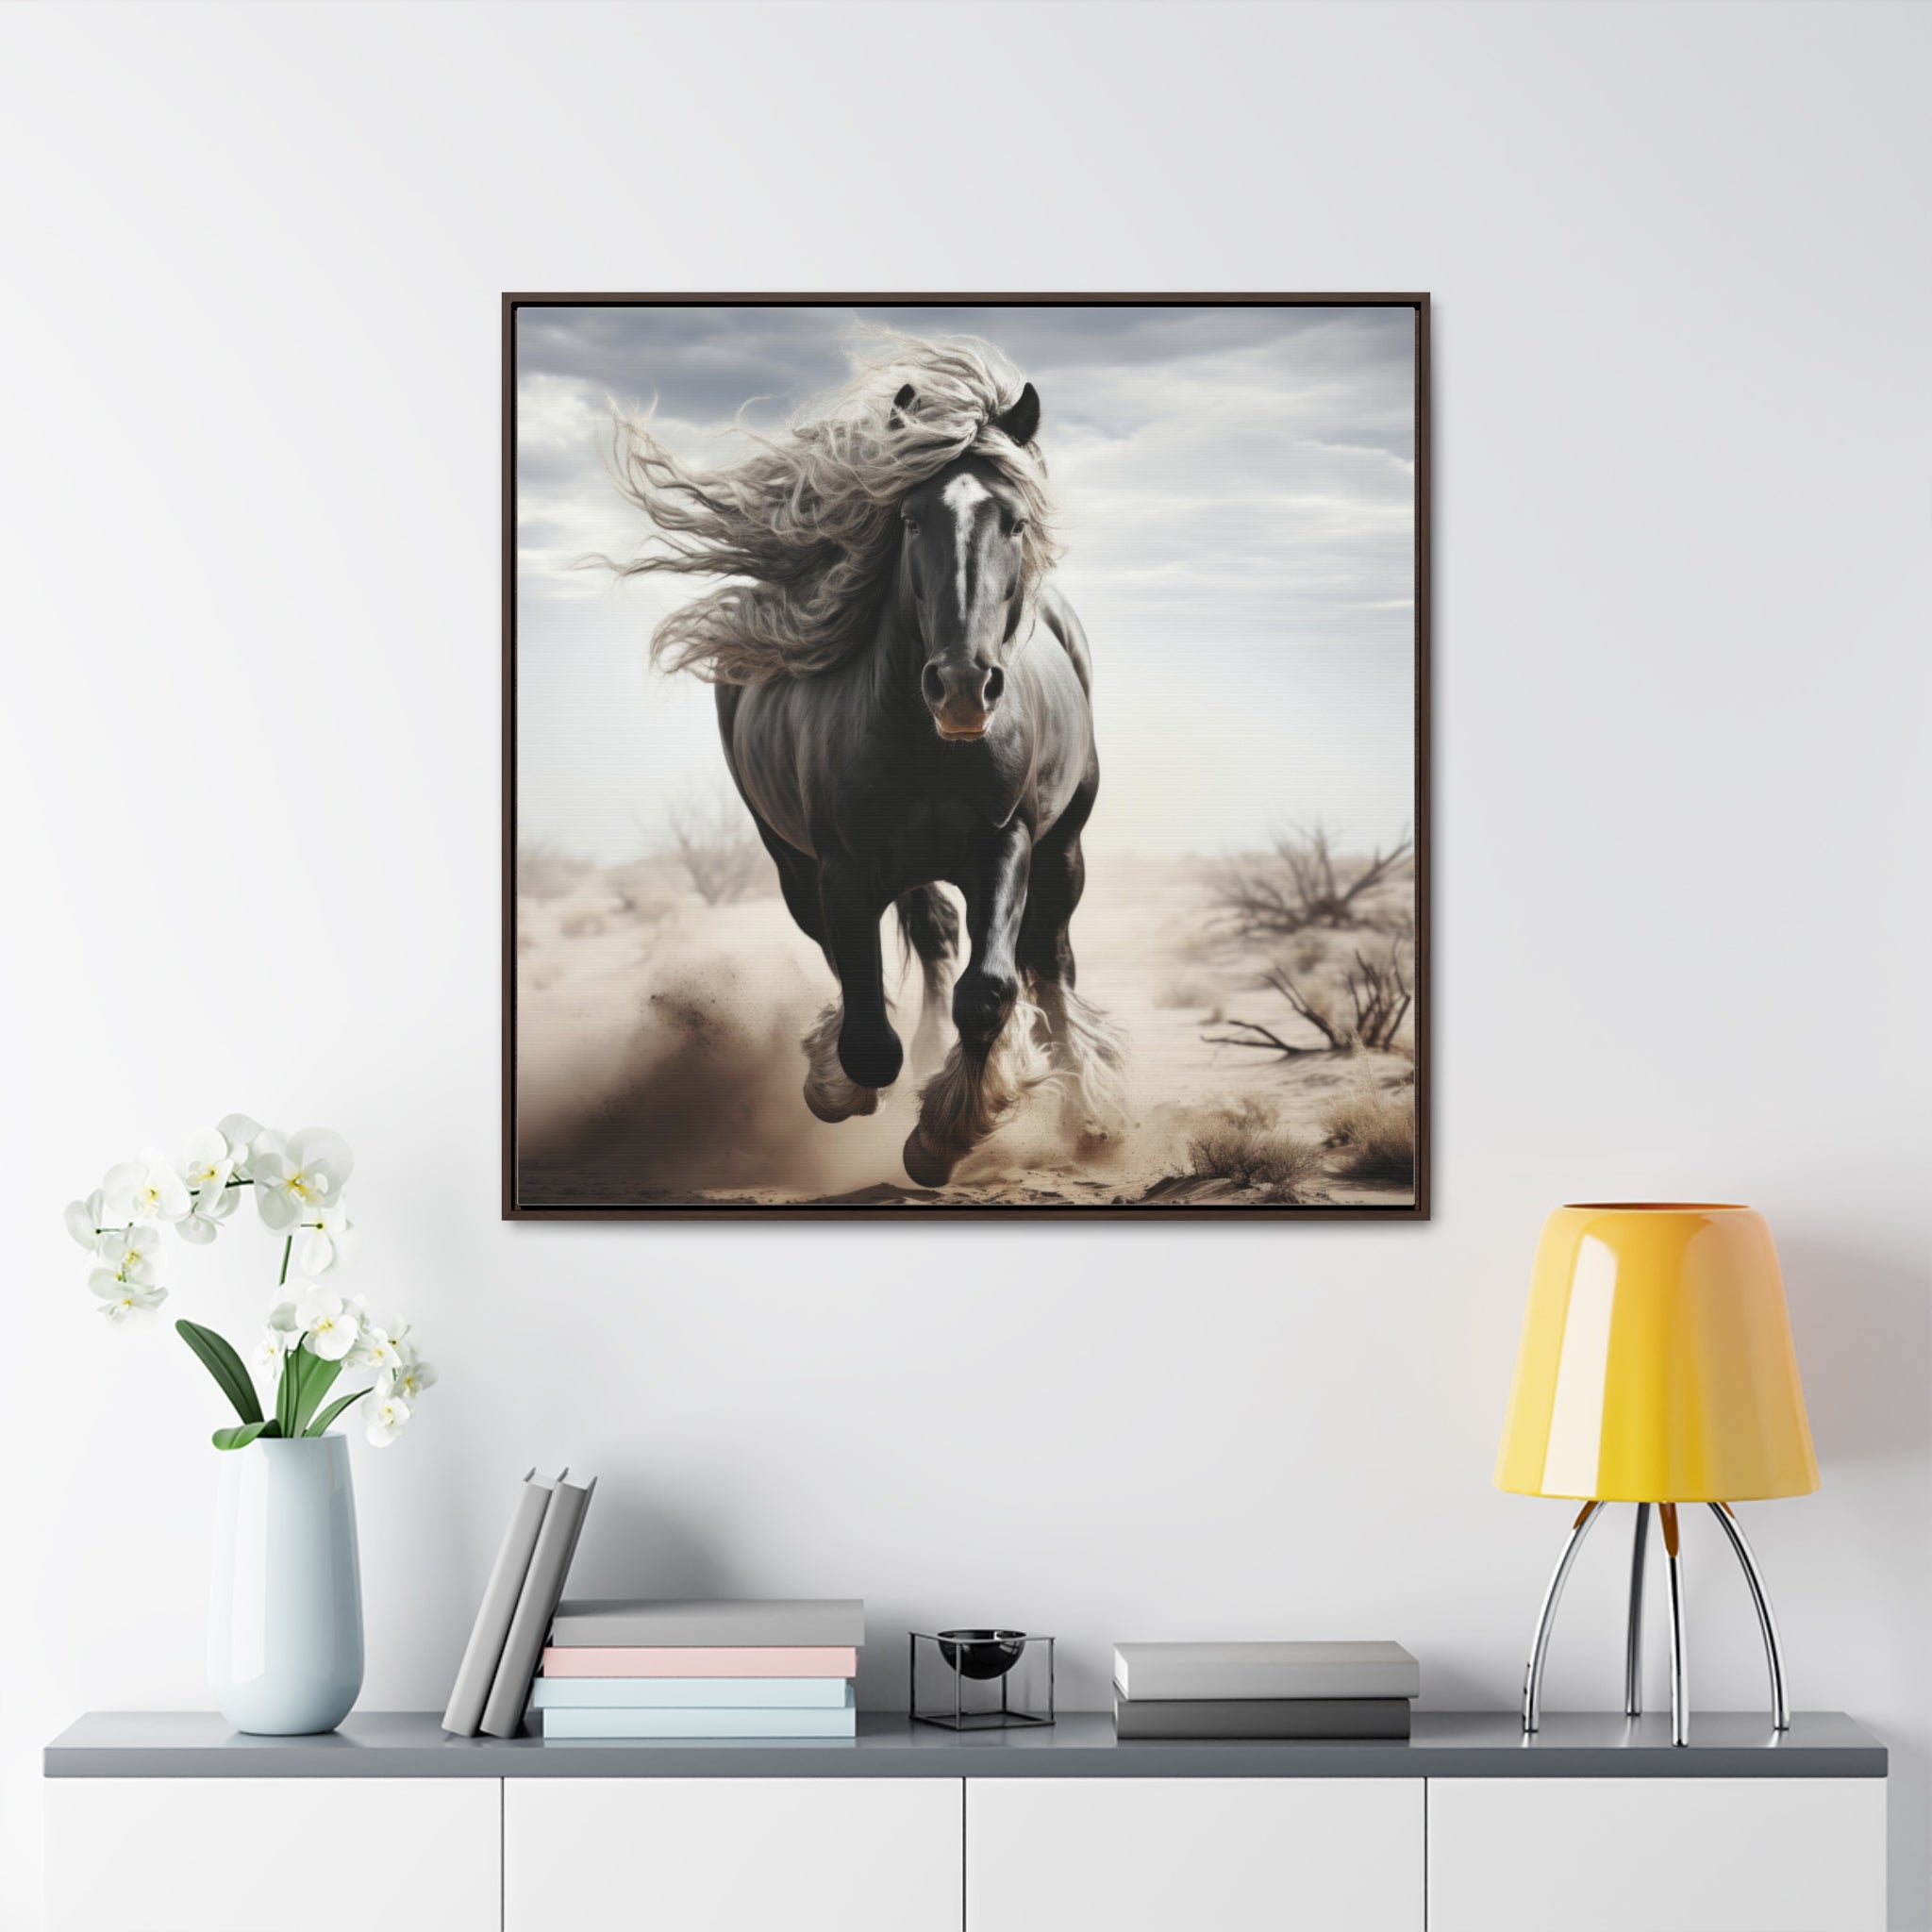 Galineers Cob | Gallery Canvas Wraps, Square Frame